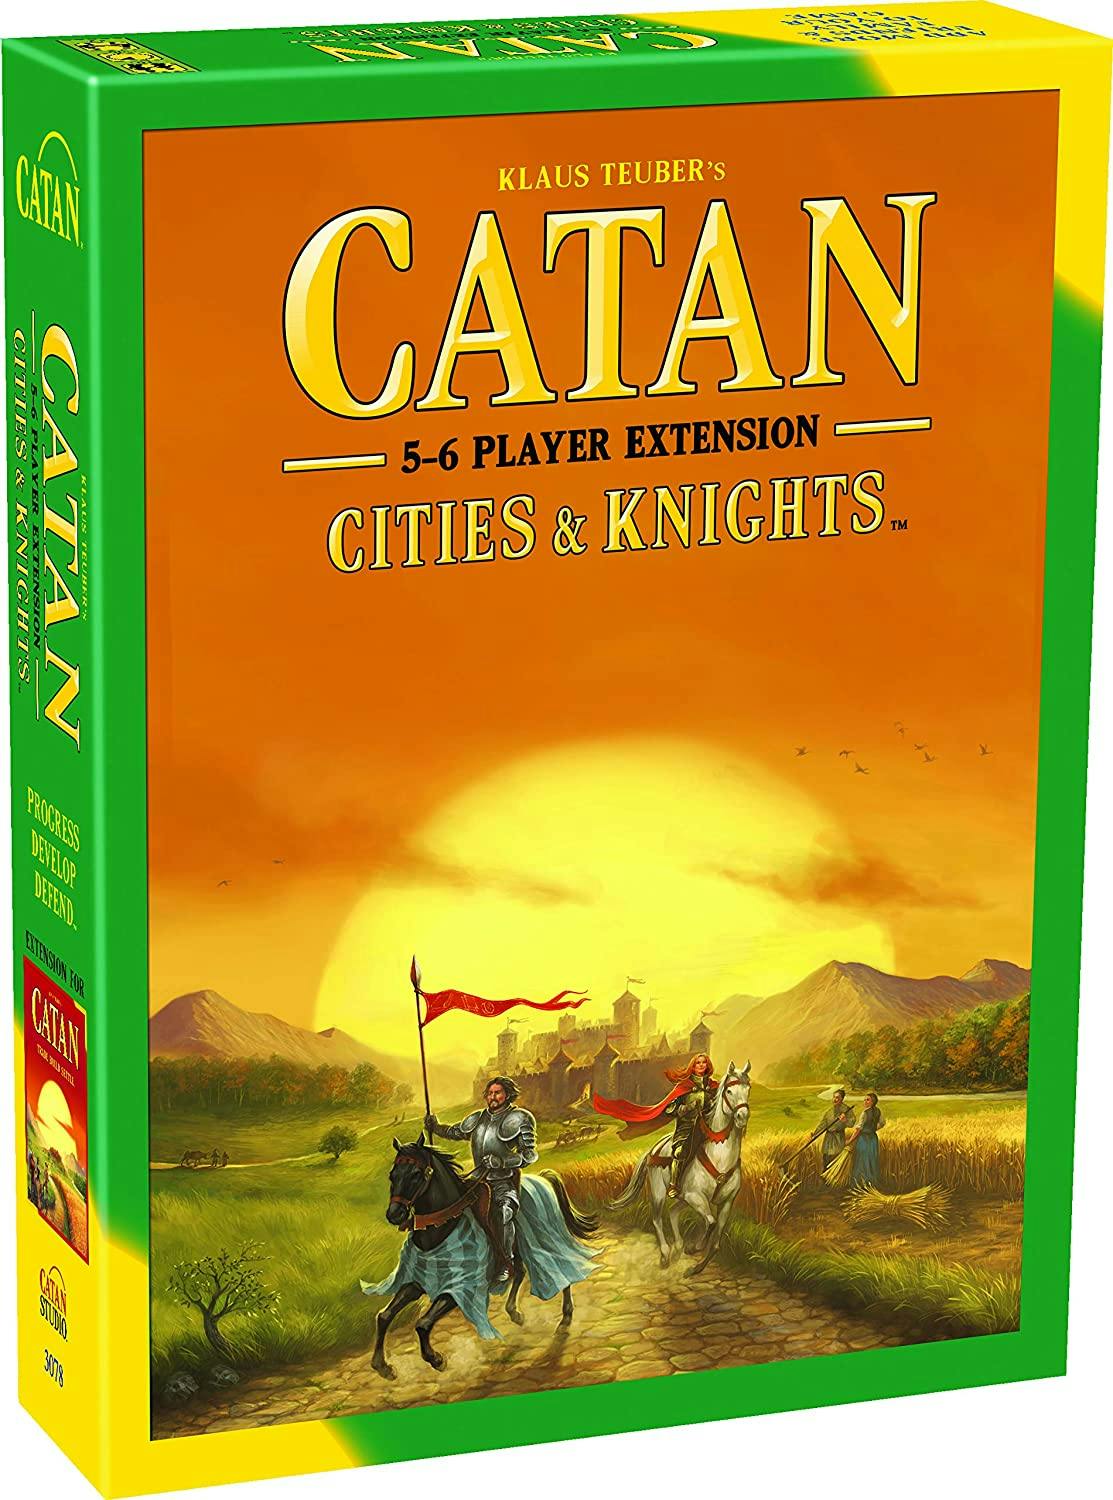 Catan: Cities And Knights 5-6 Player